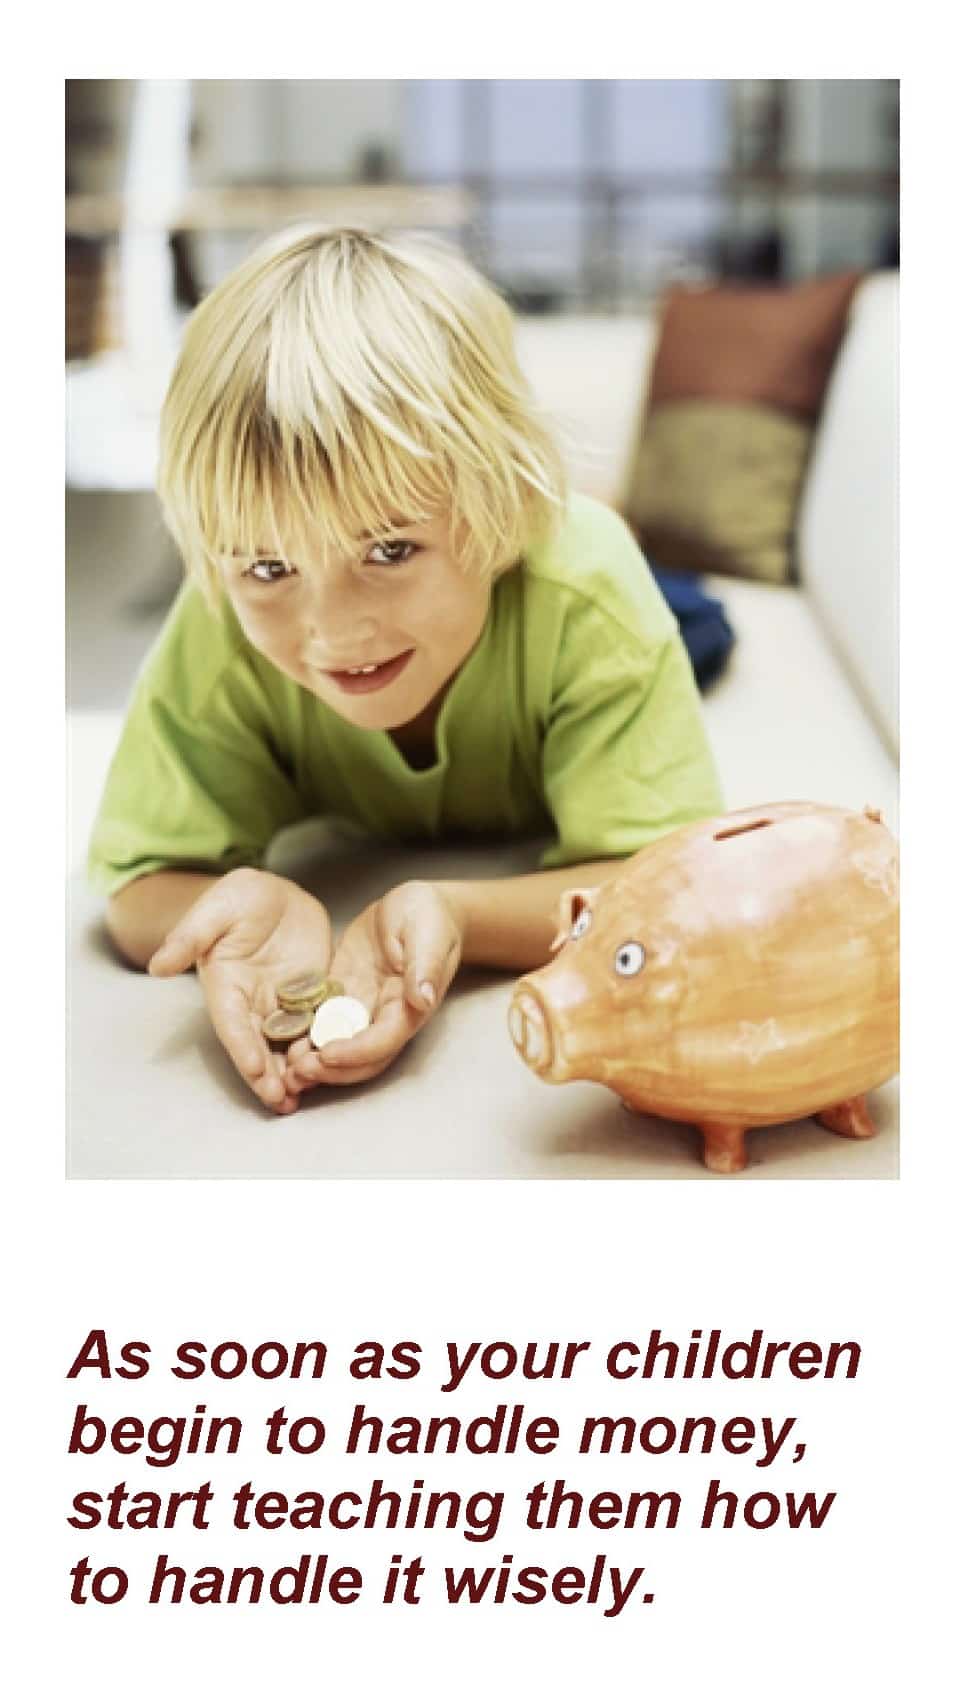 A picture with a child holding money with a piggy bank beside them. The caption says: " As soon as your children begin to handle money, start teaching them how to handle it wisely. " Article title: Teach Your Children Well: Basic Financial Education 